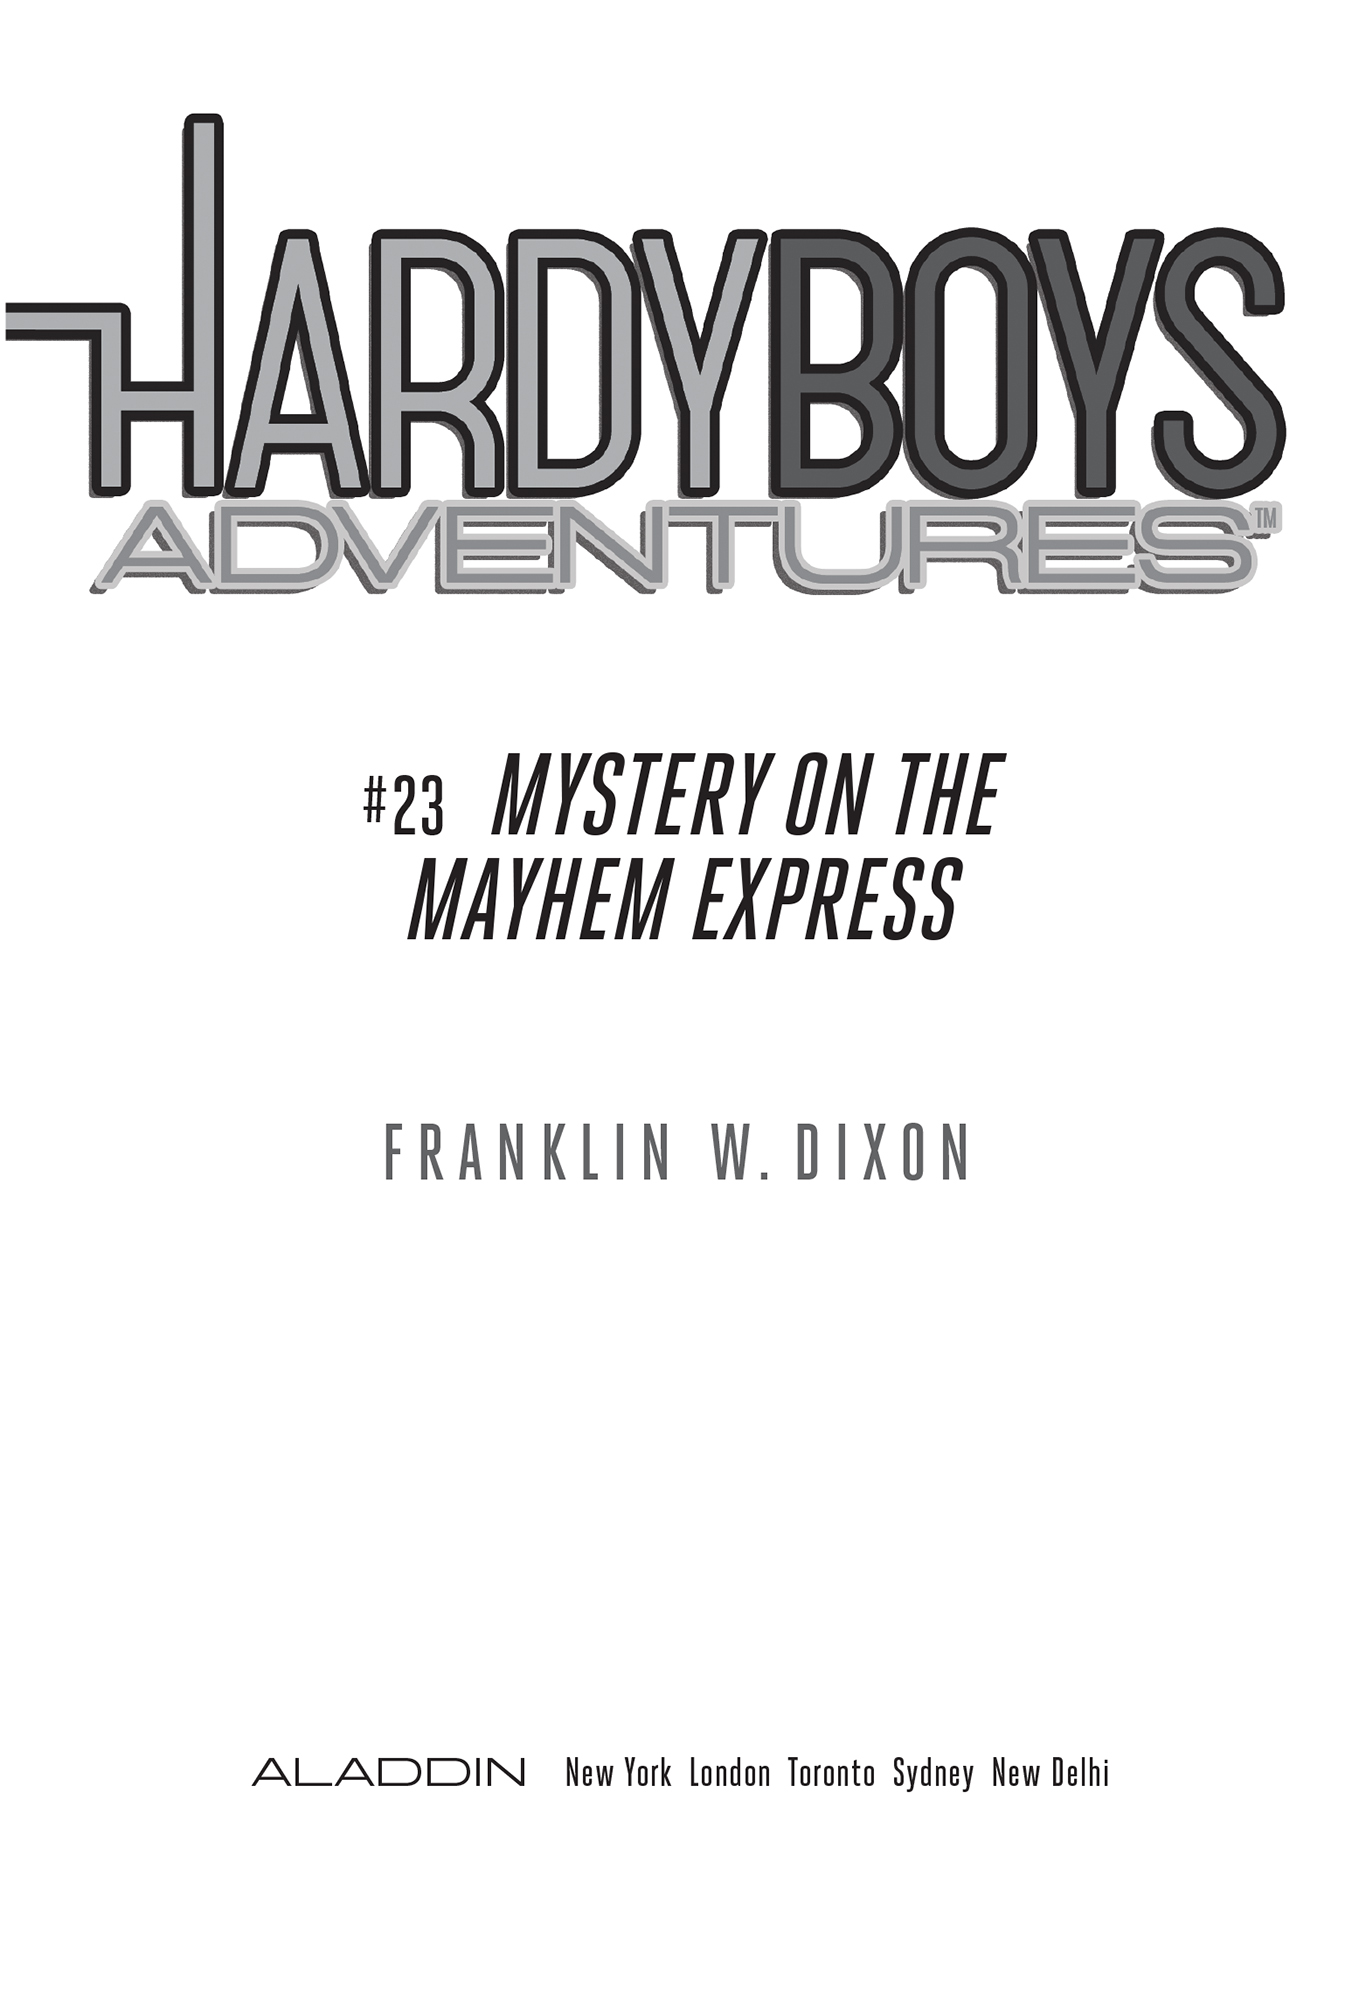 READ ALL THE MYSTERIES IN THE HARDY BOYS ADVENTURES 1 Secret of the Red Arrow - photo 2